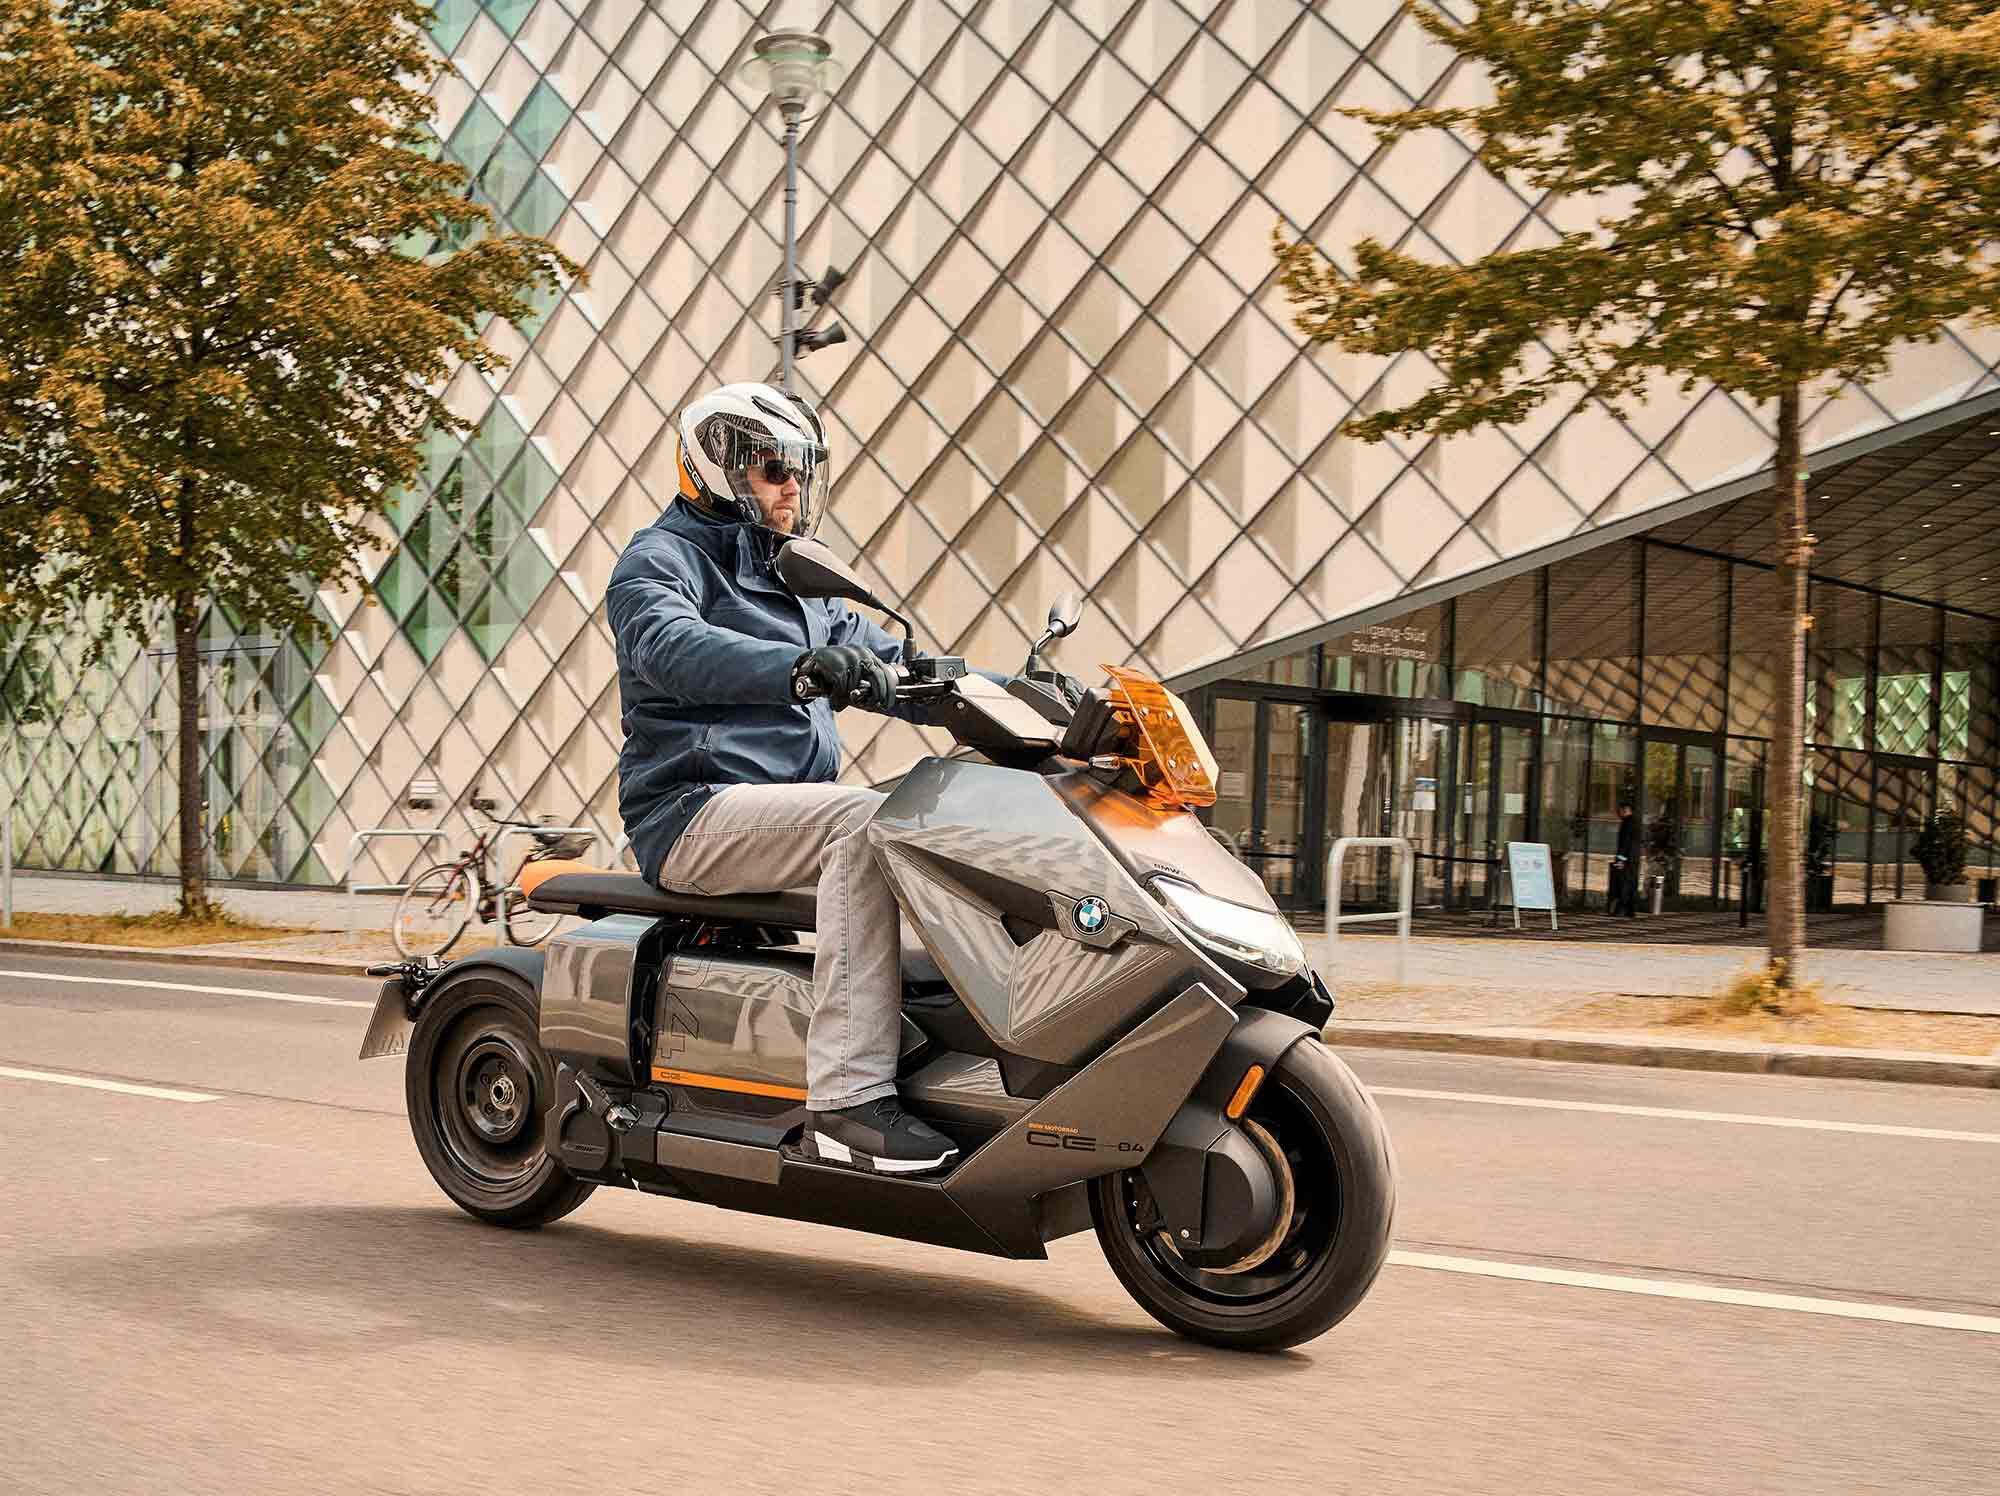 BMW has released the CE 04 electric scooter for 2022, and it’s not all that different from the radically styled concept bike from 2017.